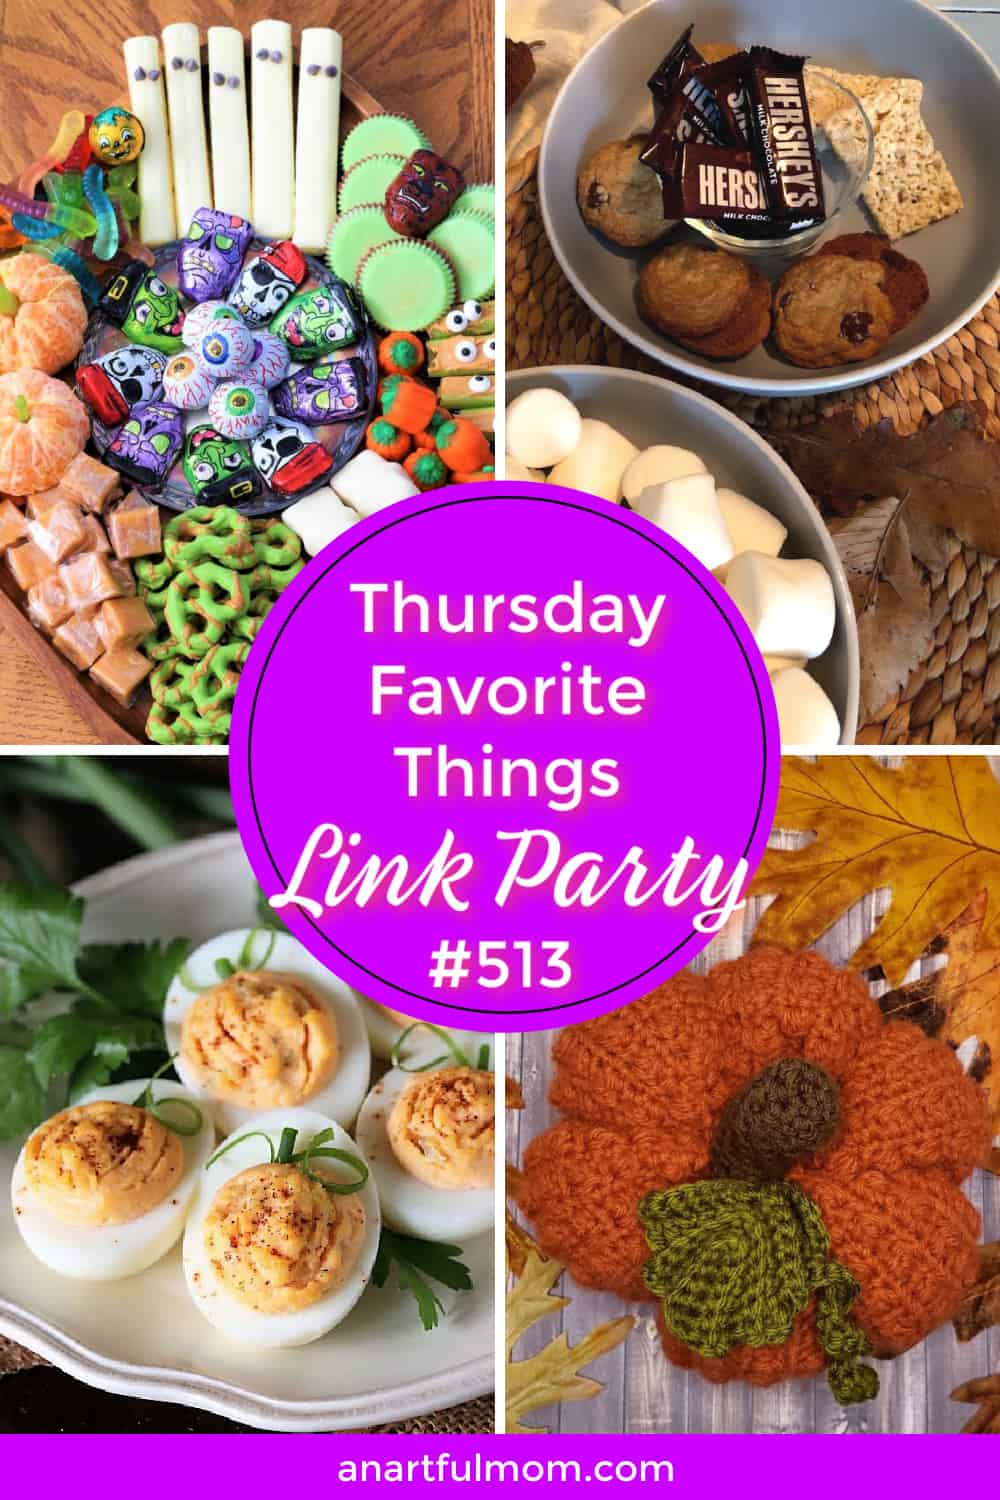 Thursday Favorite Things (TFT) Link Party: Halloween Snacks and Autumn Fun